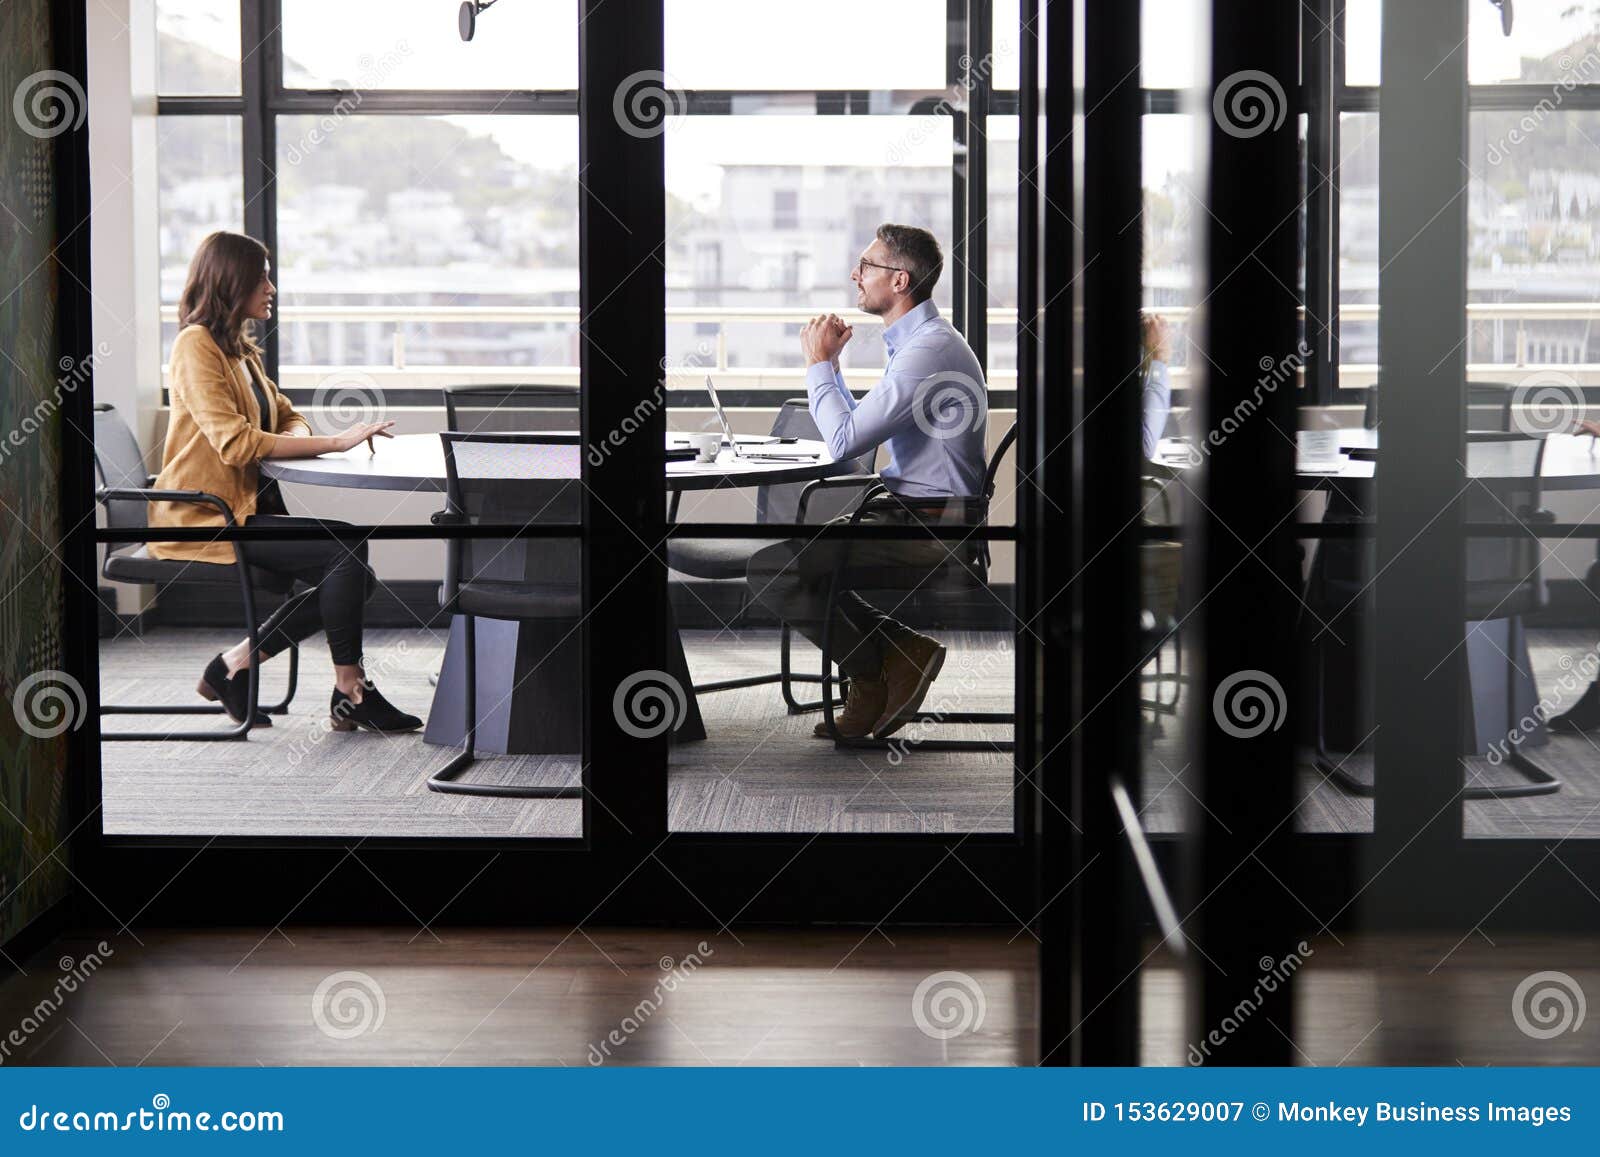 a businessman and young woman meeting for a job interview, full length, seen through glass wall